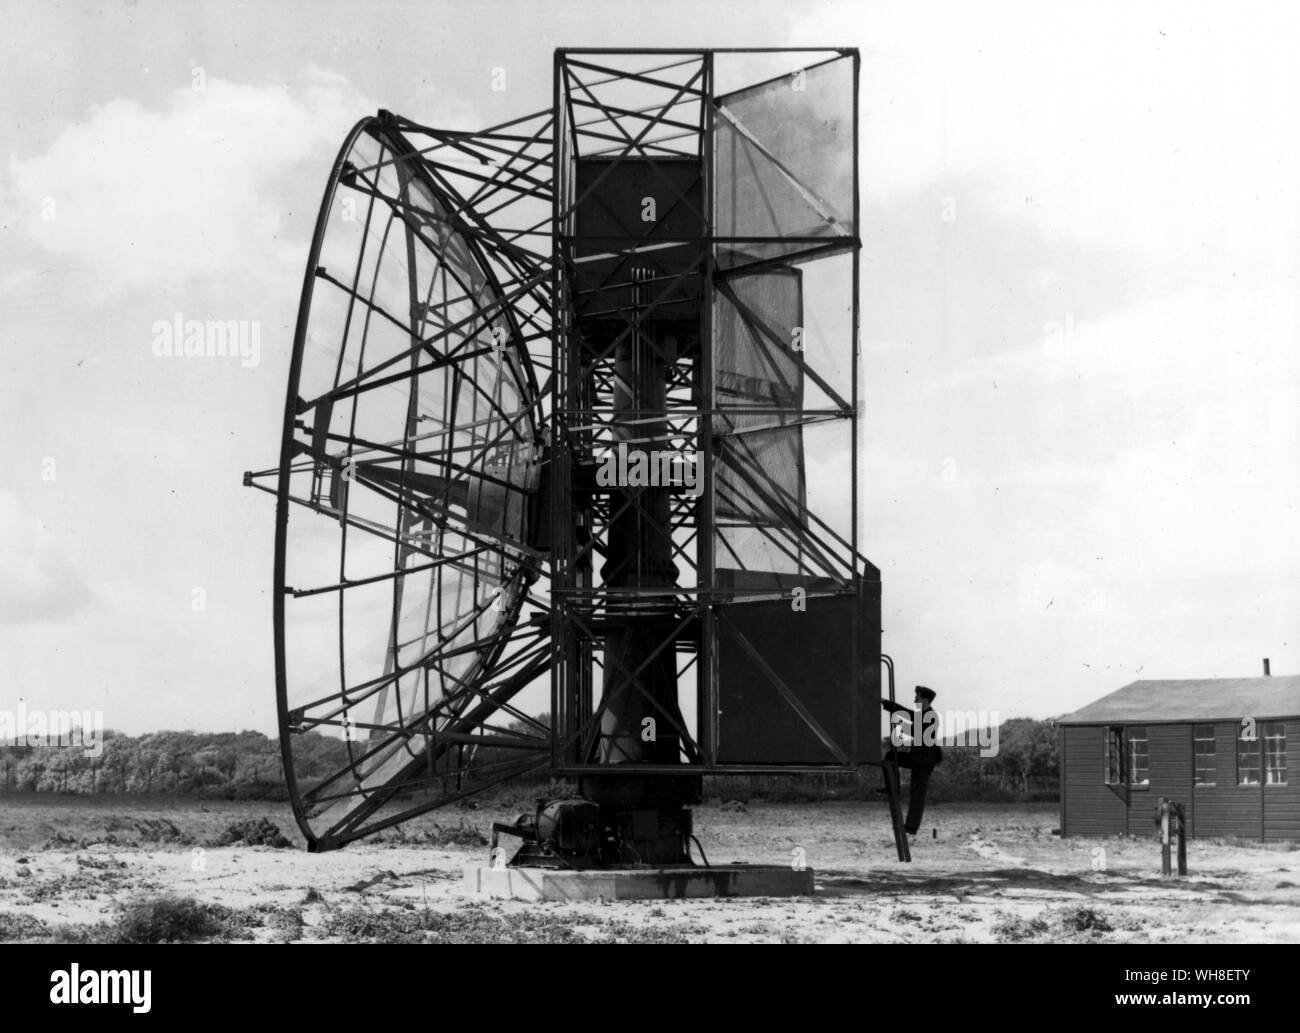 The Radar Fighting Direction. The fighter direction aerial system with a cabin mounted on the aerial structure of the house, both the transmitter and receiver. Radar owes much of its fast development to the advent of war. Its purpose was to give fighter planes tactical advantage over the enemy when employed on offensive operations. Science at War page 26. Stock Photo